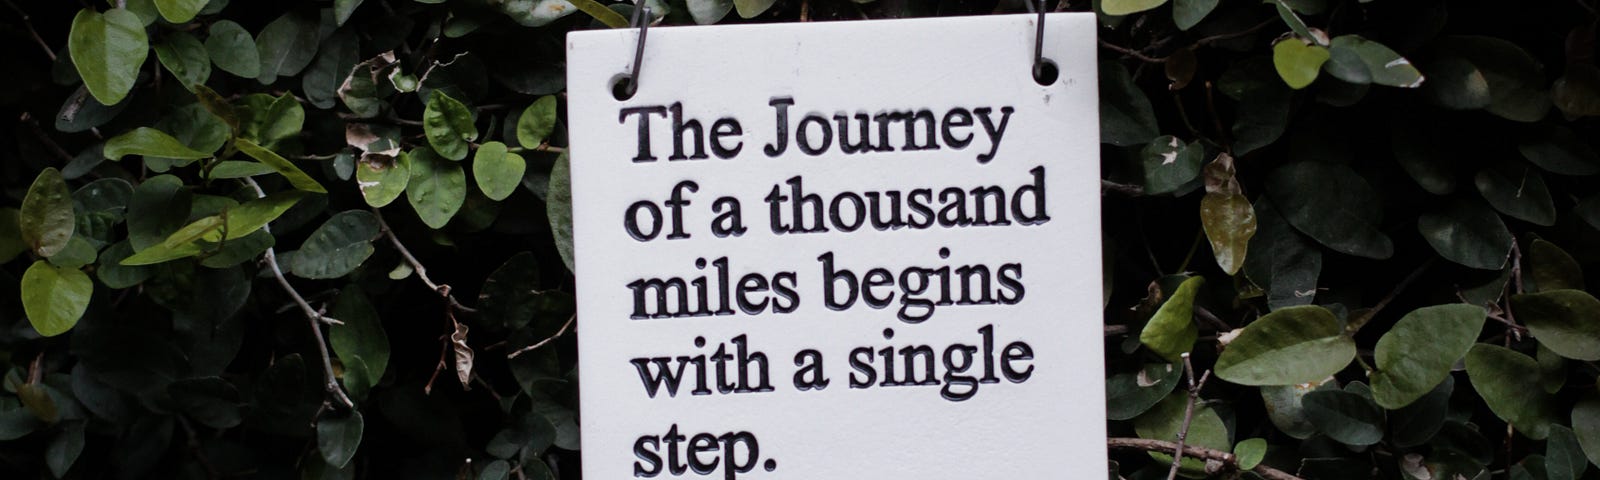 Sign that reads “the journey of a thousand miles begins with a single step.”